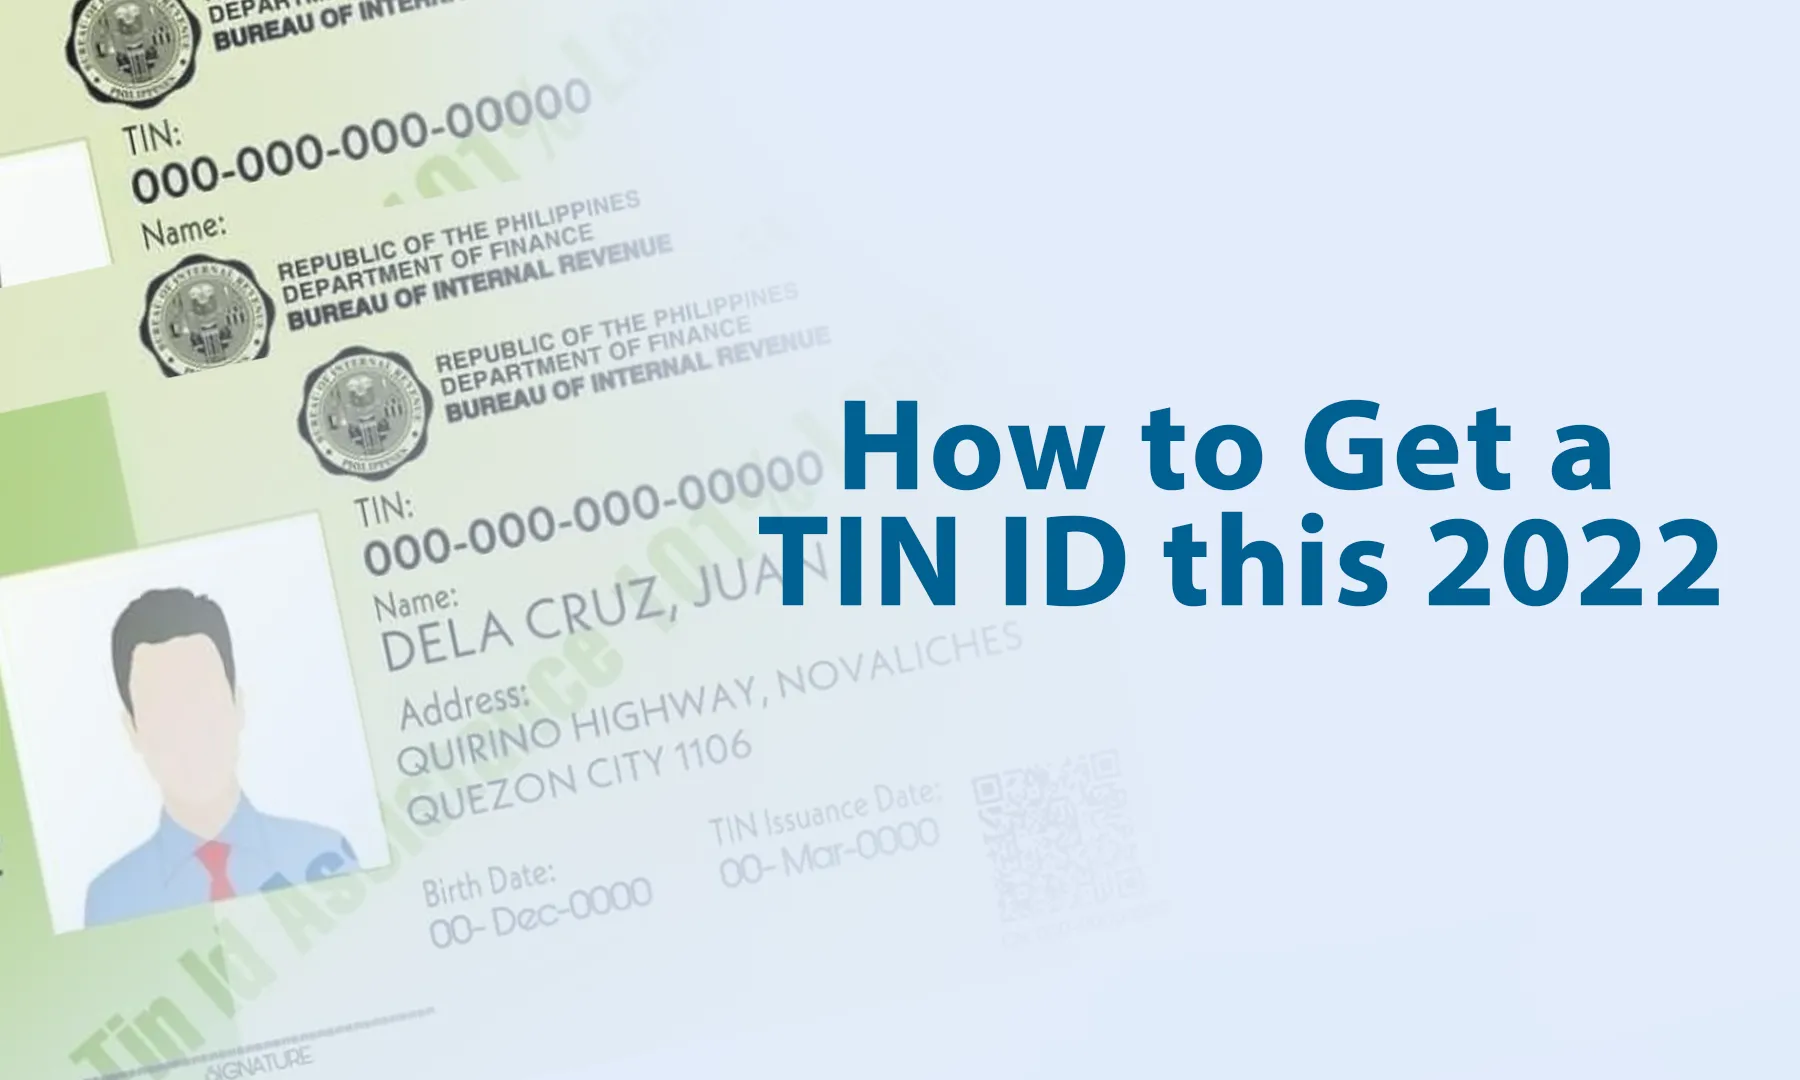 How to get TIN ID this 2022